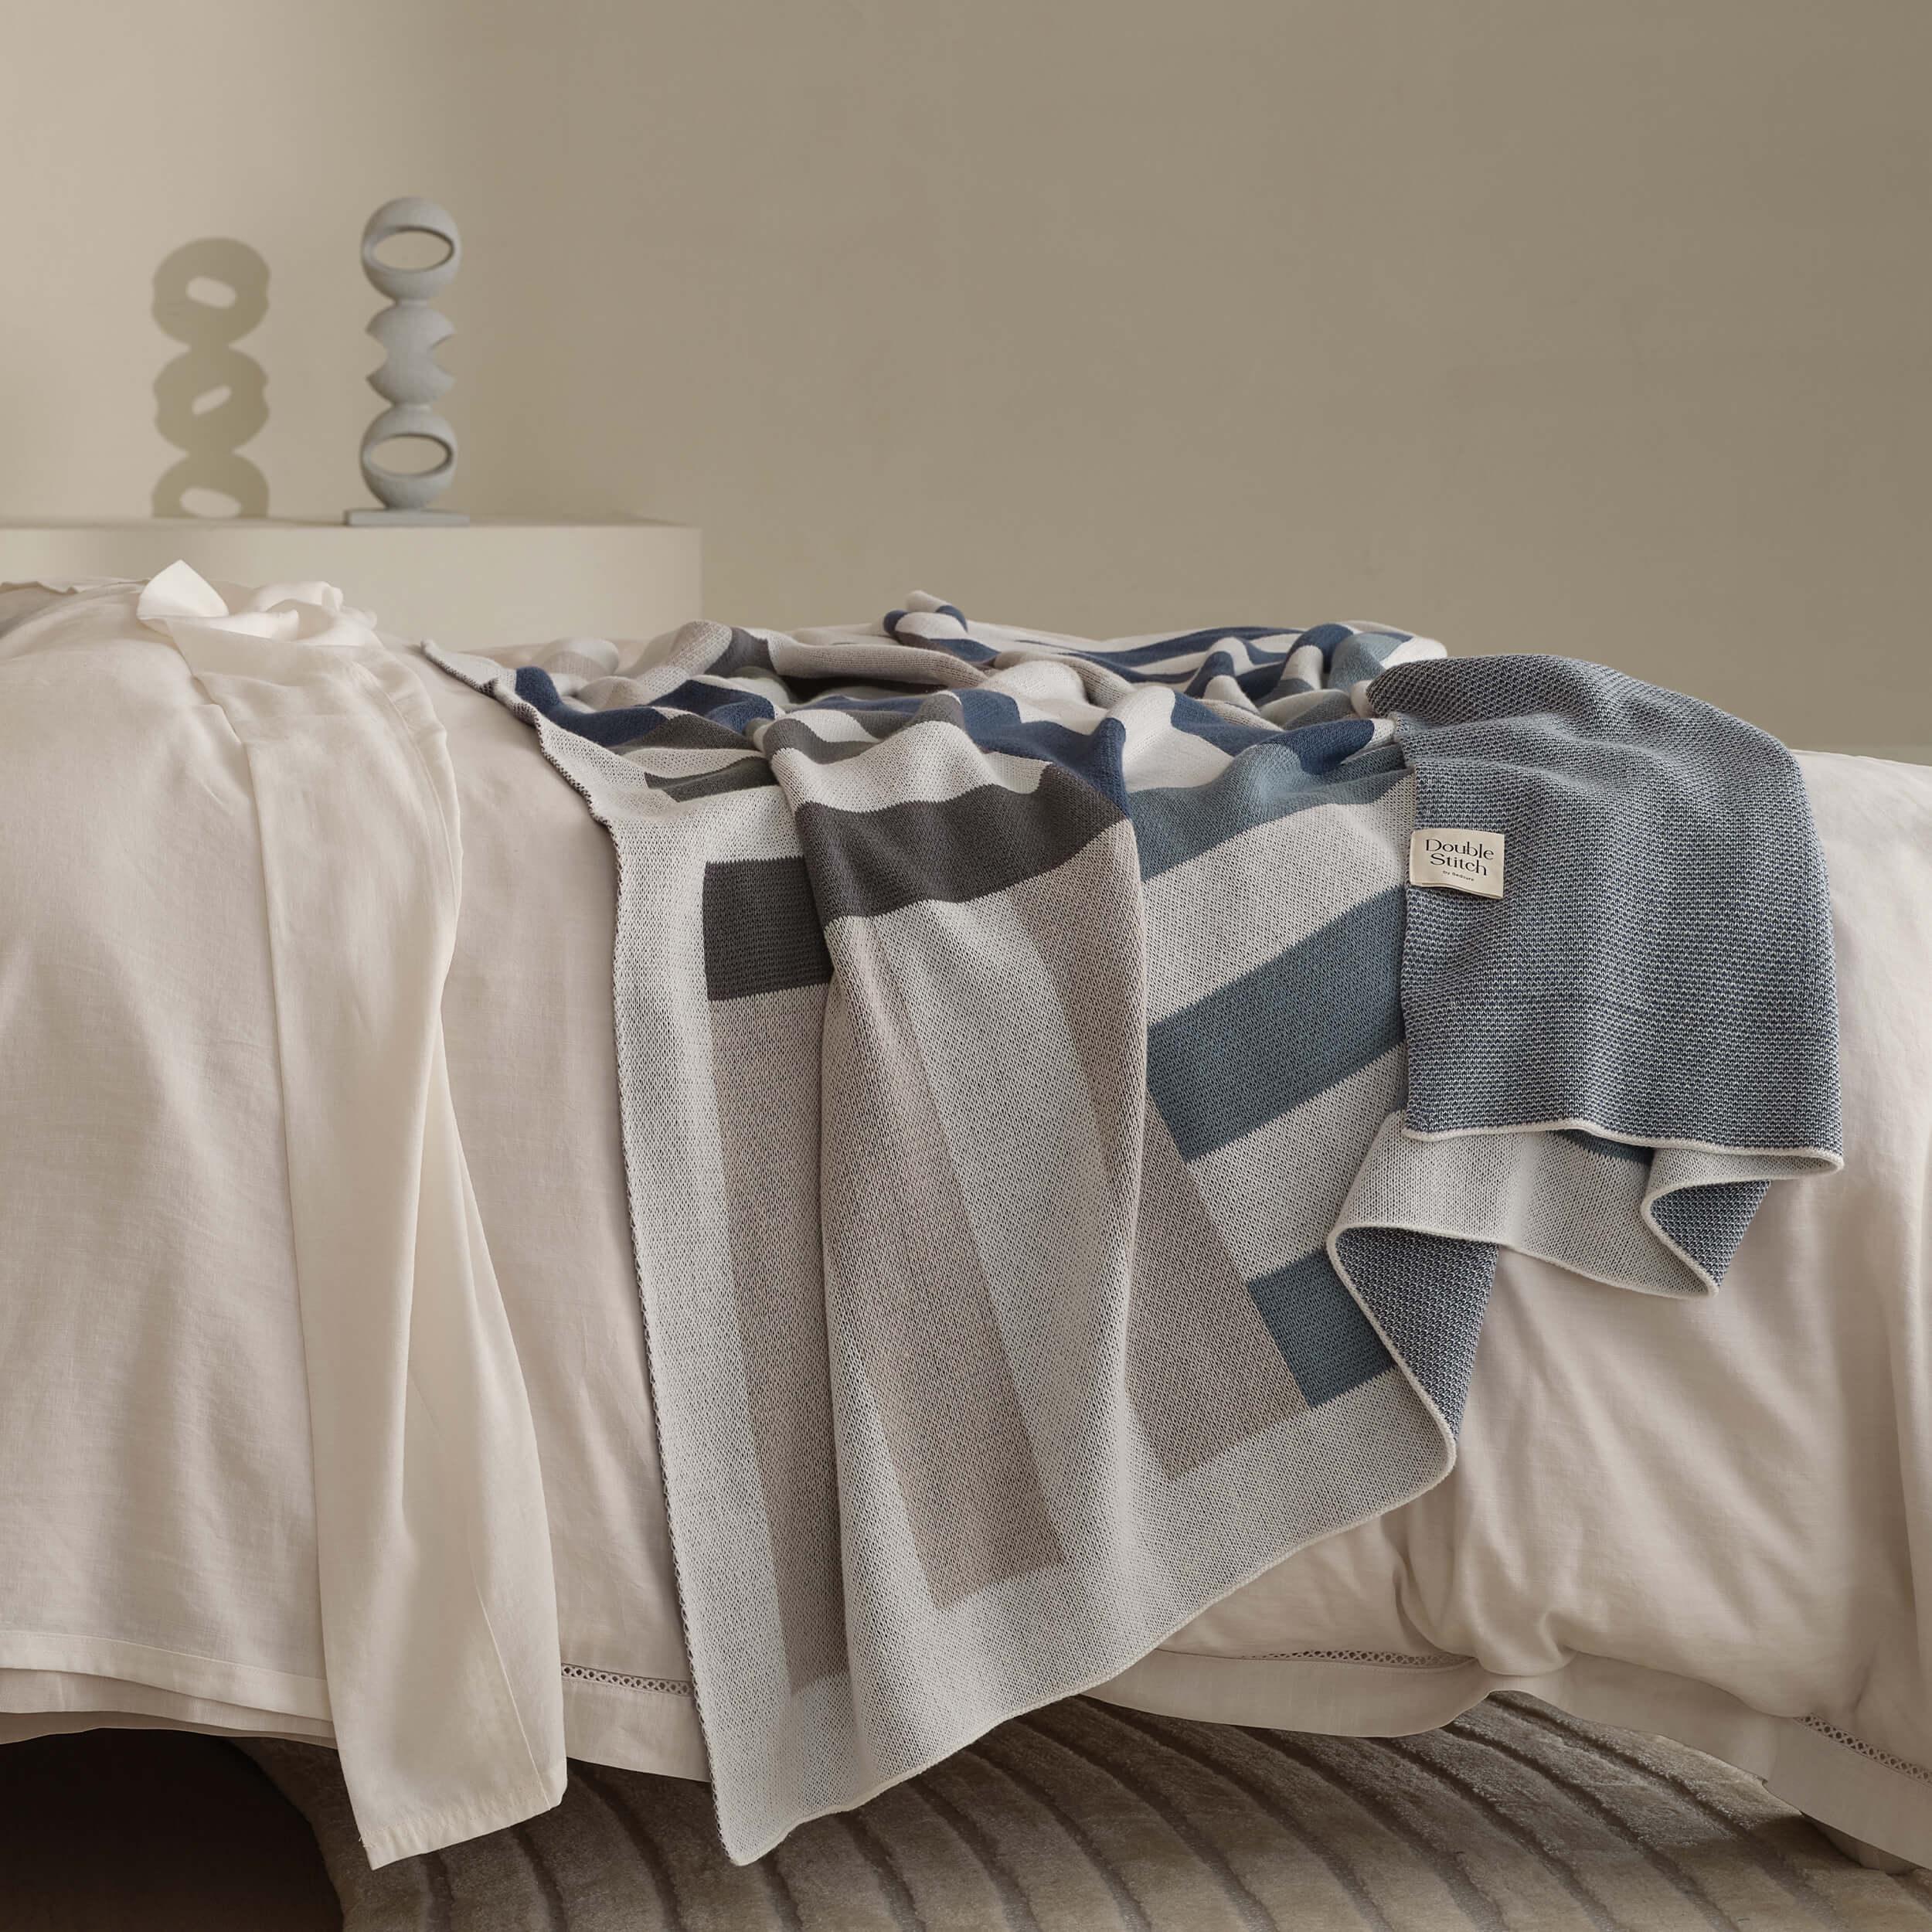 The Intarsia knit pattern on this modern throw blanket creates a captivating visual effect.